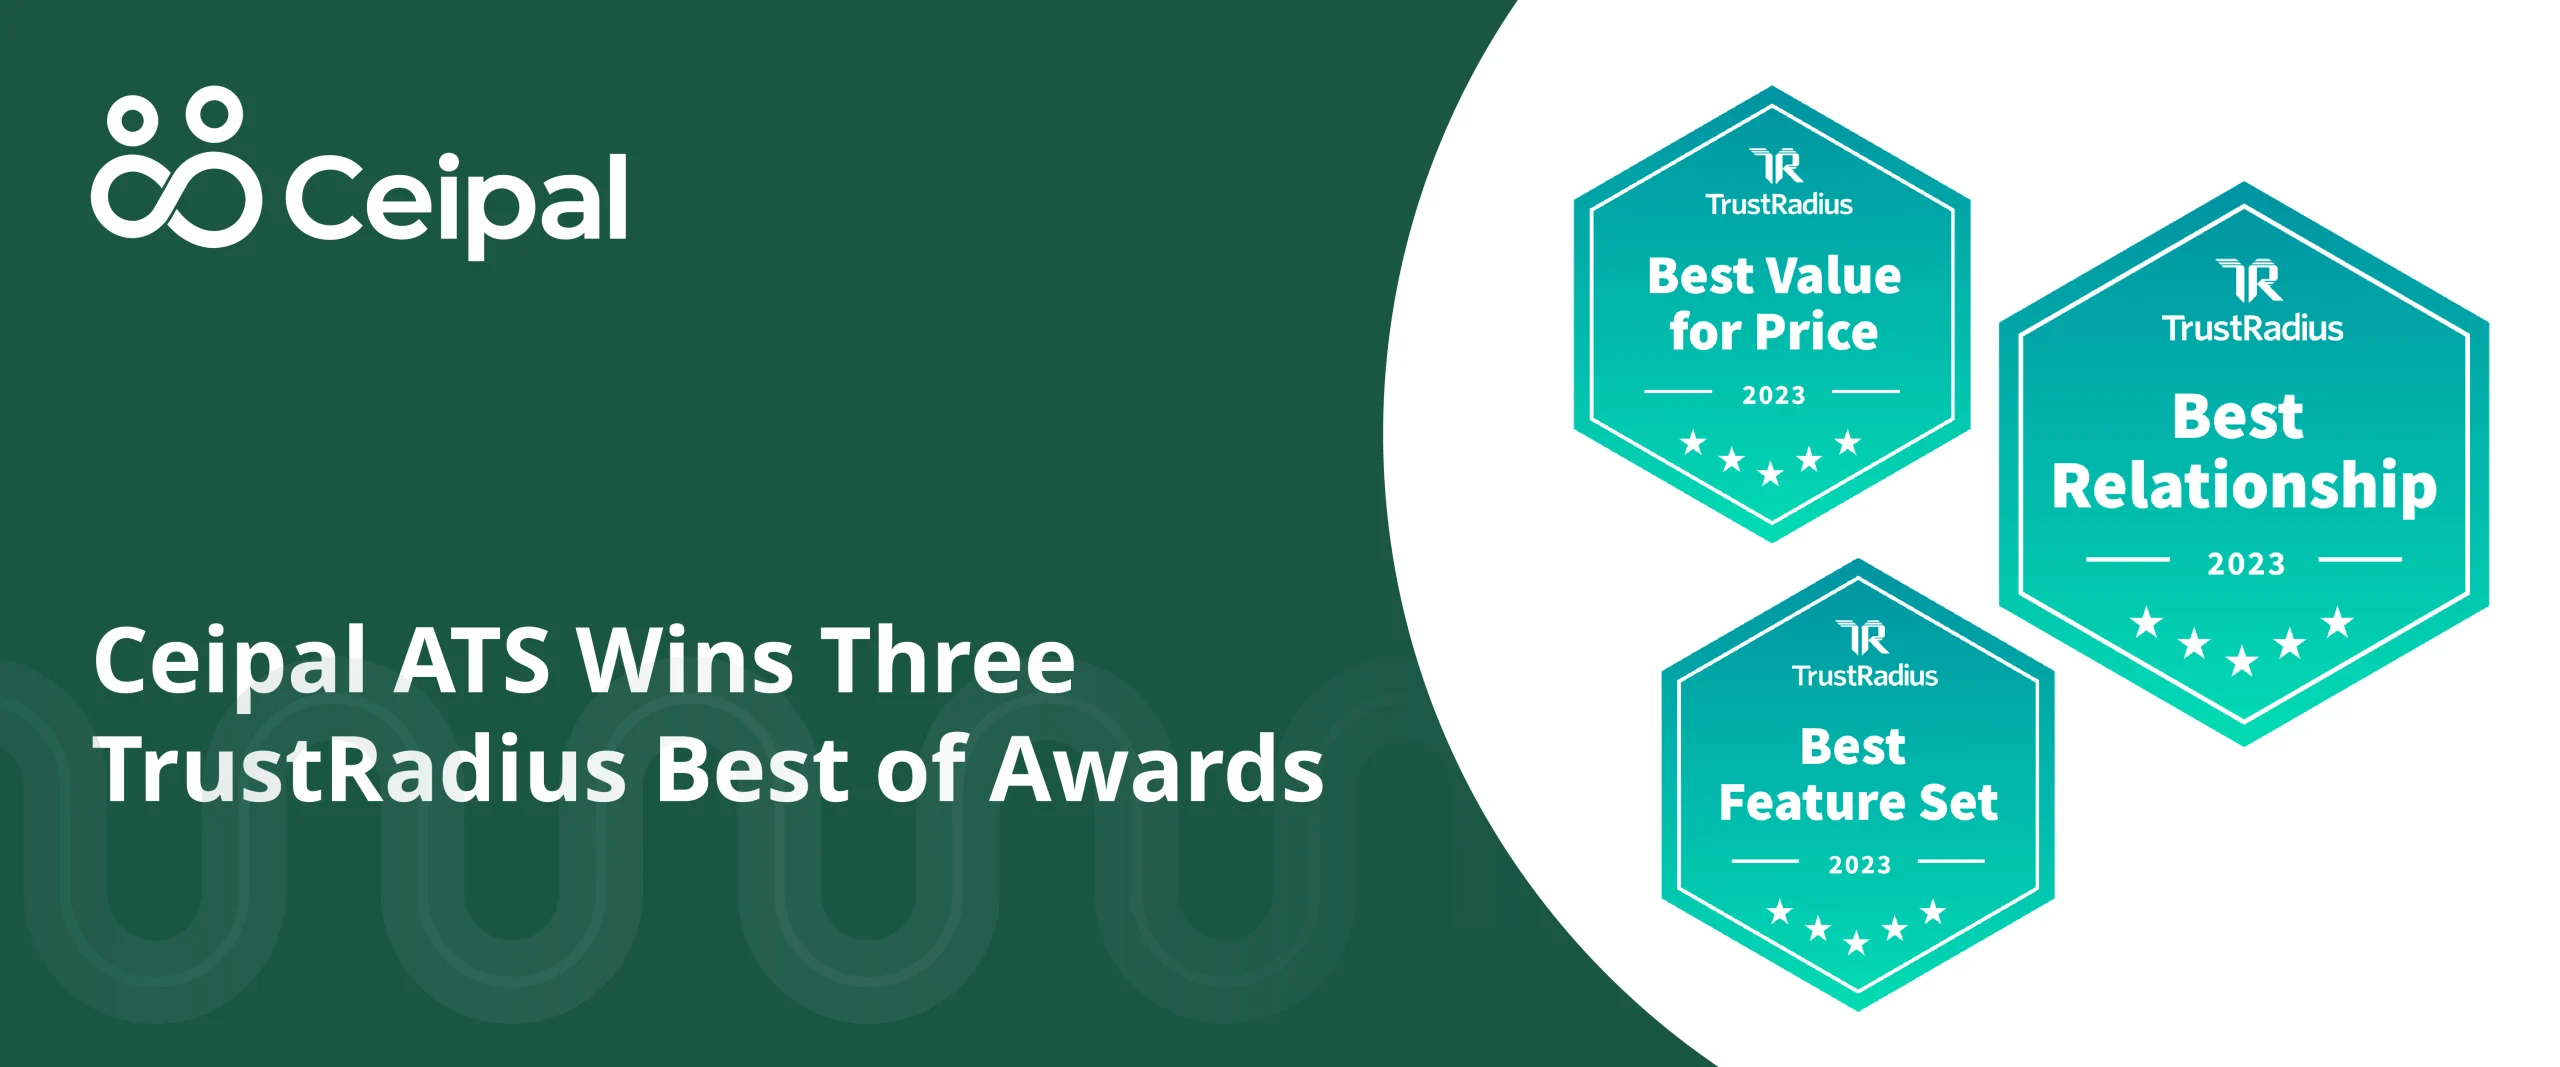 Ceipal’s Applicant Tracking System Wins Three TrustRadius 2023 Best of Awards￼